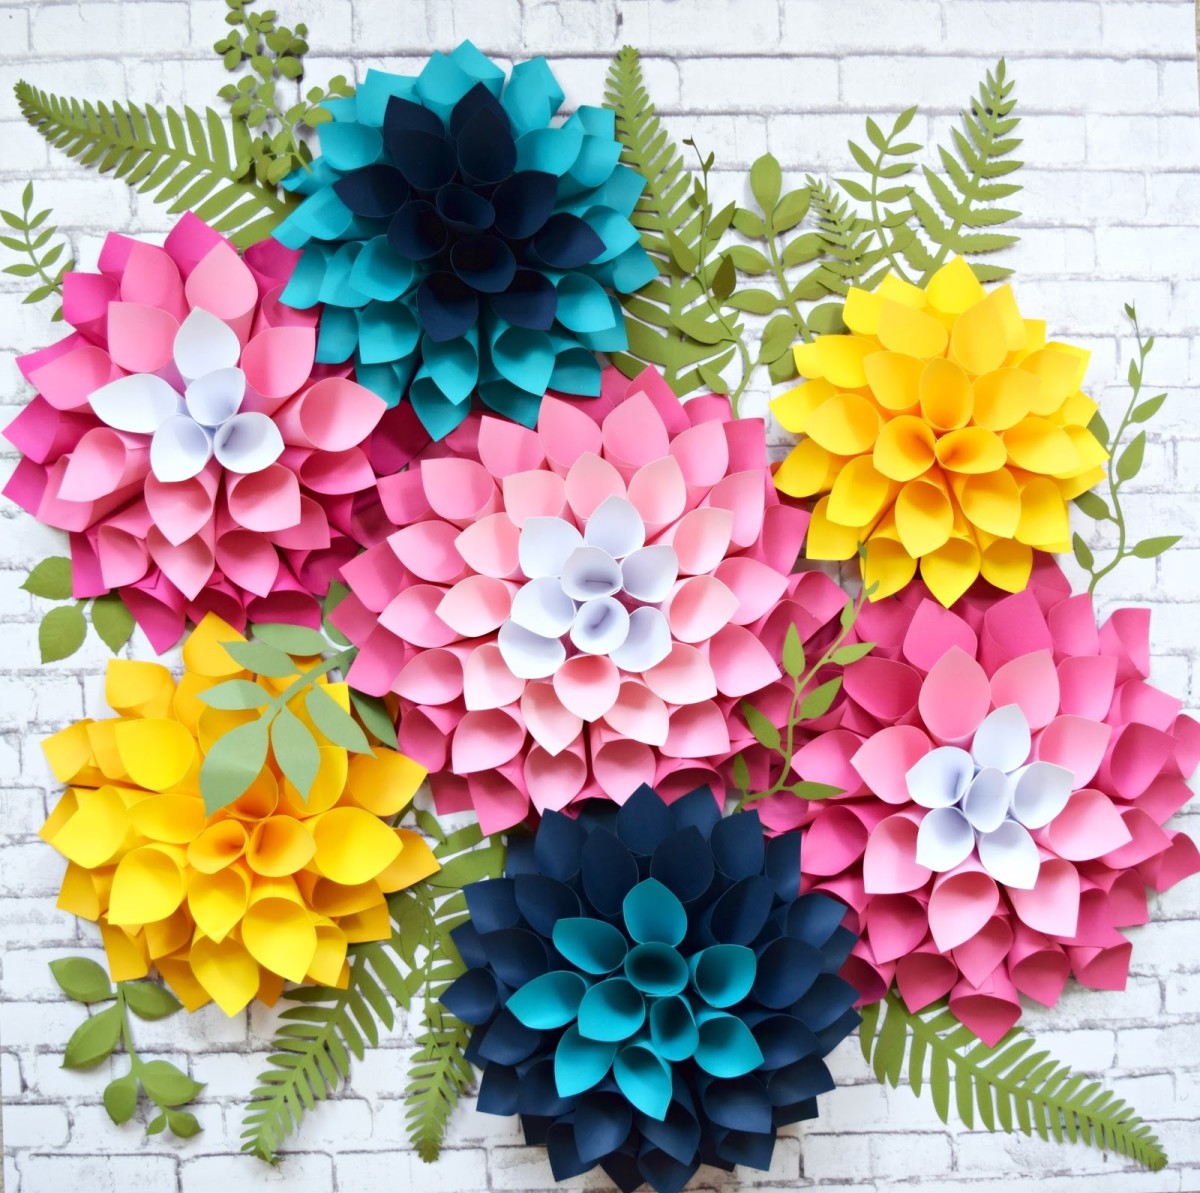 Paper flowers are an amazing art form that can be made with different techniques to be shared with family, friends and the community